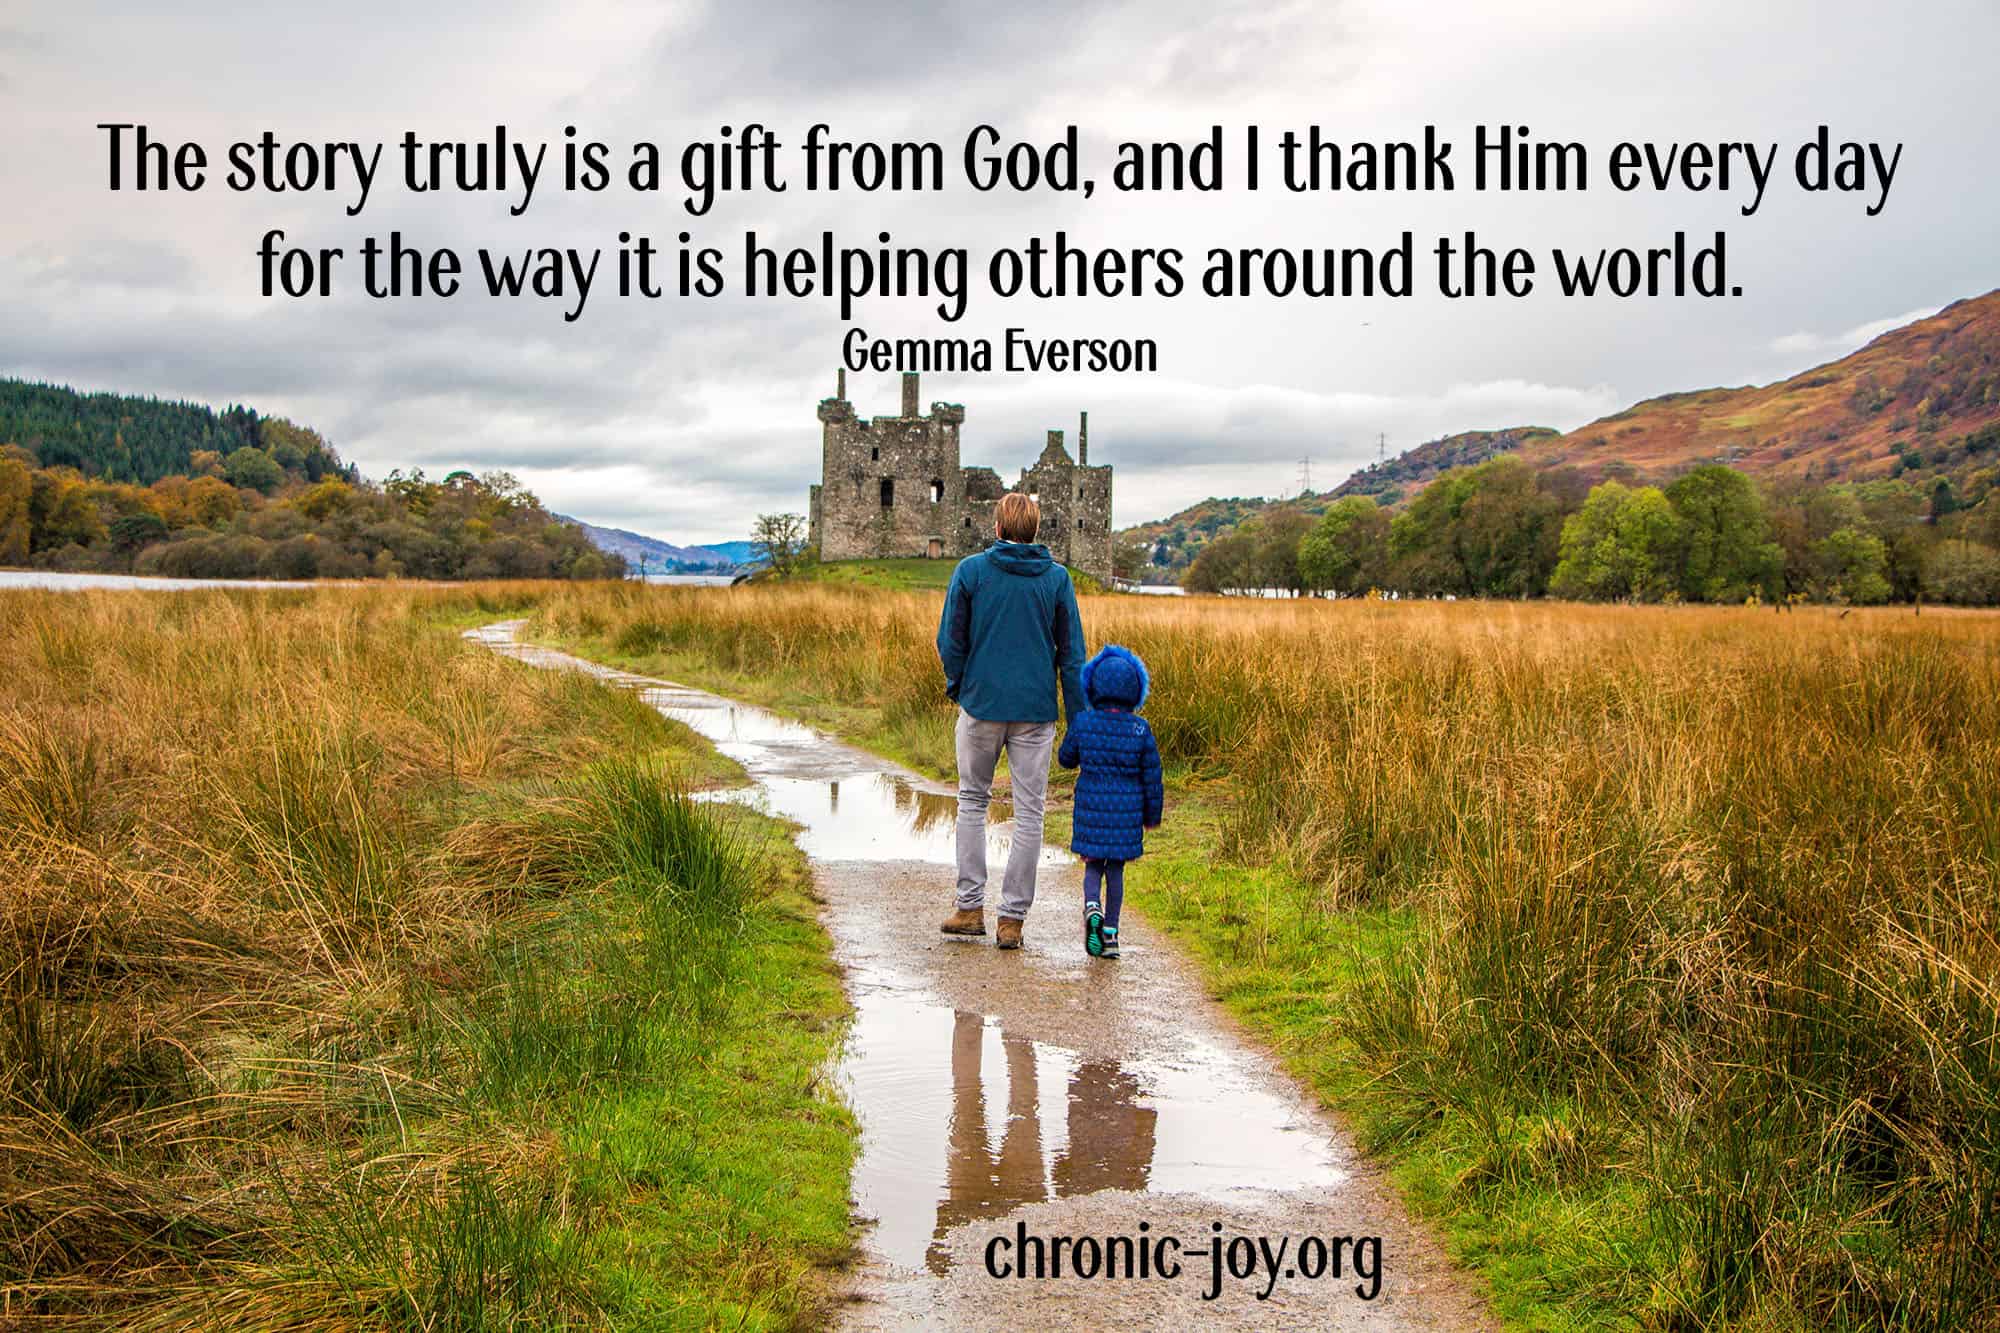 "The story truly is a gift from God, and I thank Him every day for the way it is helping others around the world." Gemma Everson